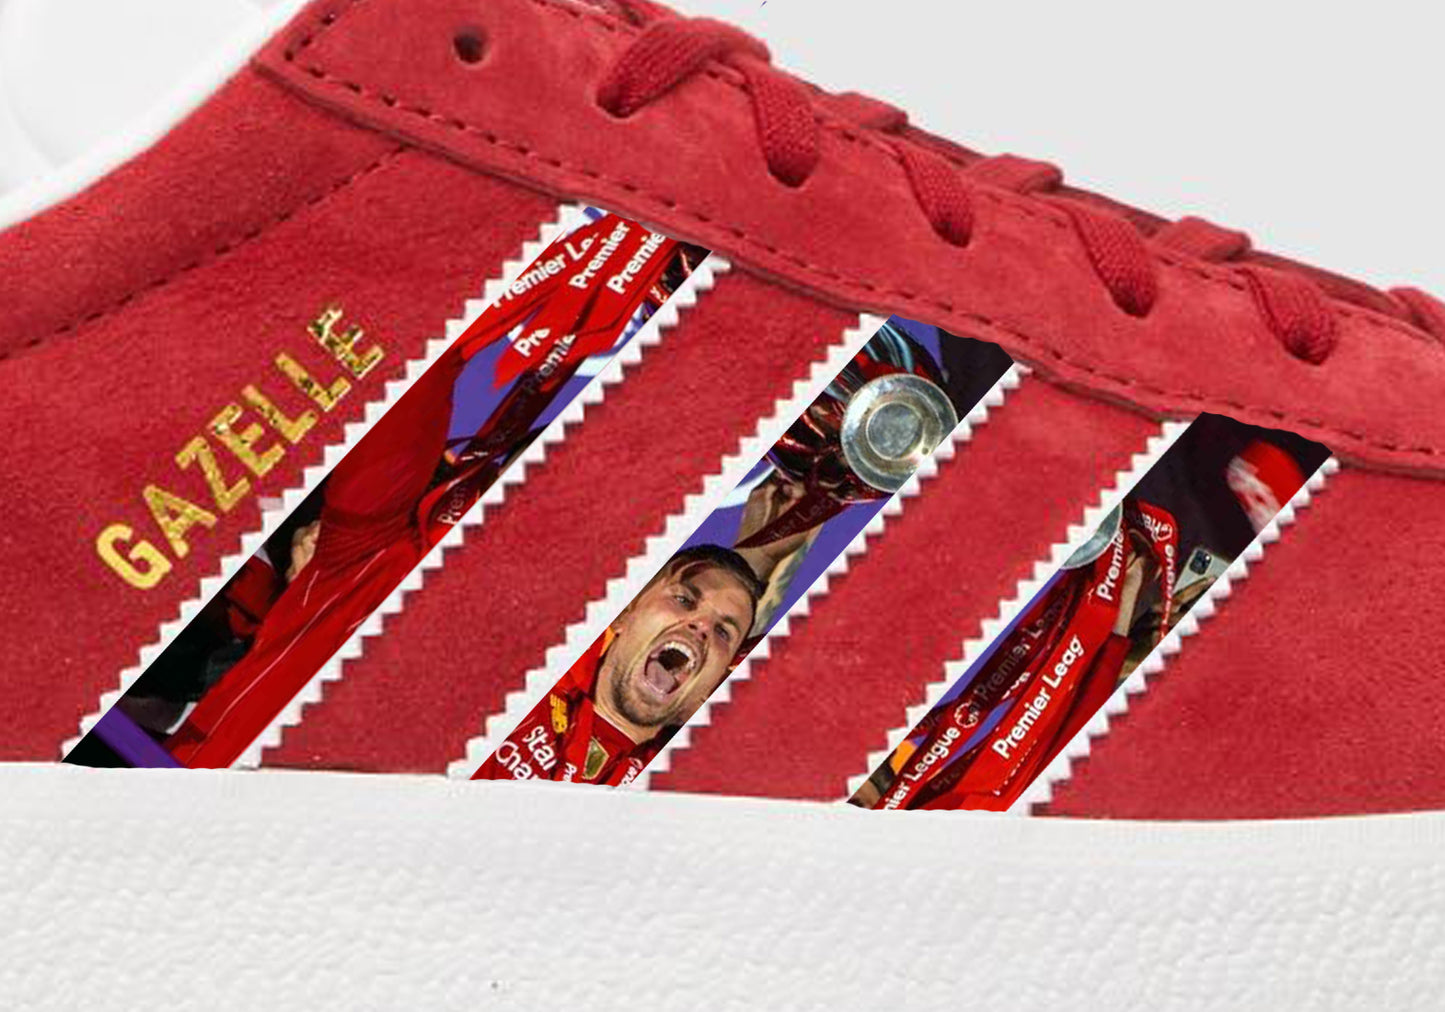 Limited edition Liverpool FC Jordan Henderson inspired red / white Adidas custom Gazelle trainers / sneakers